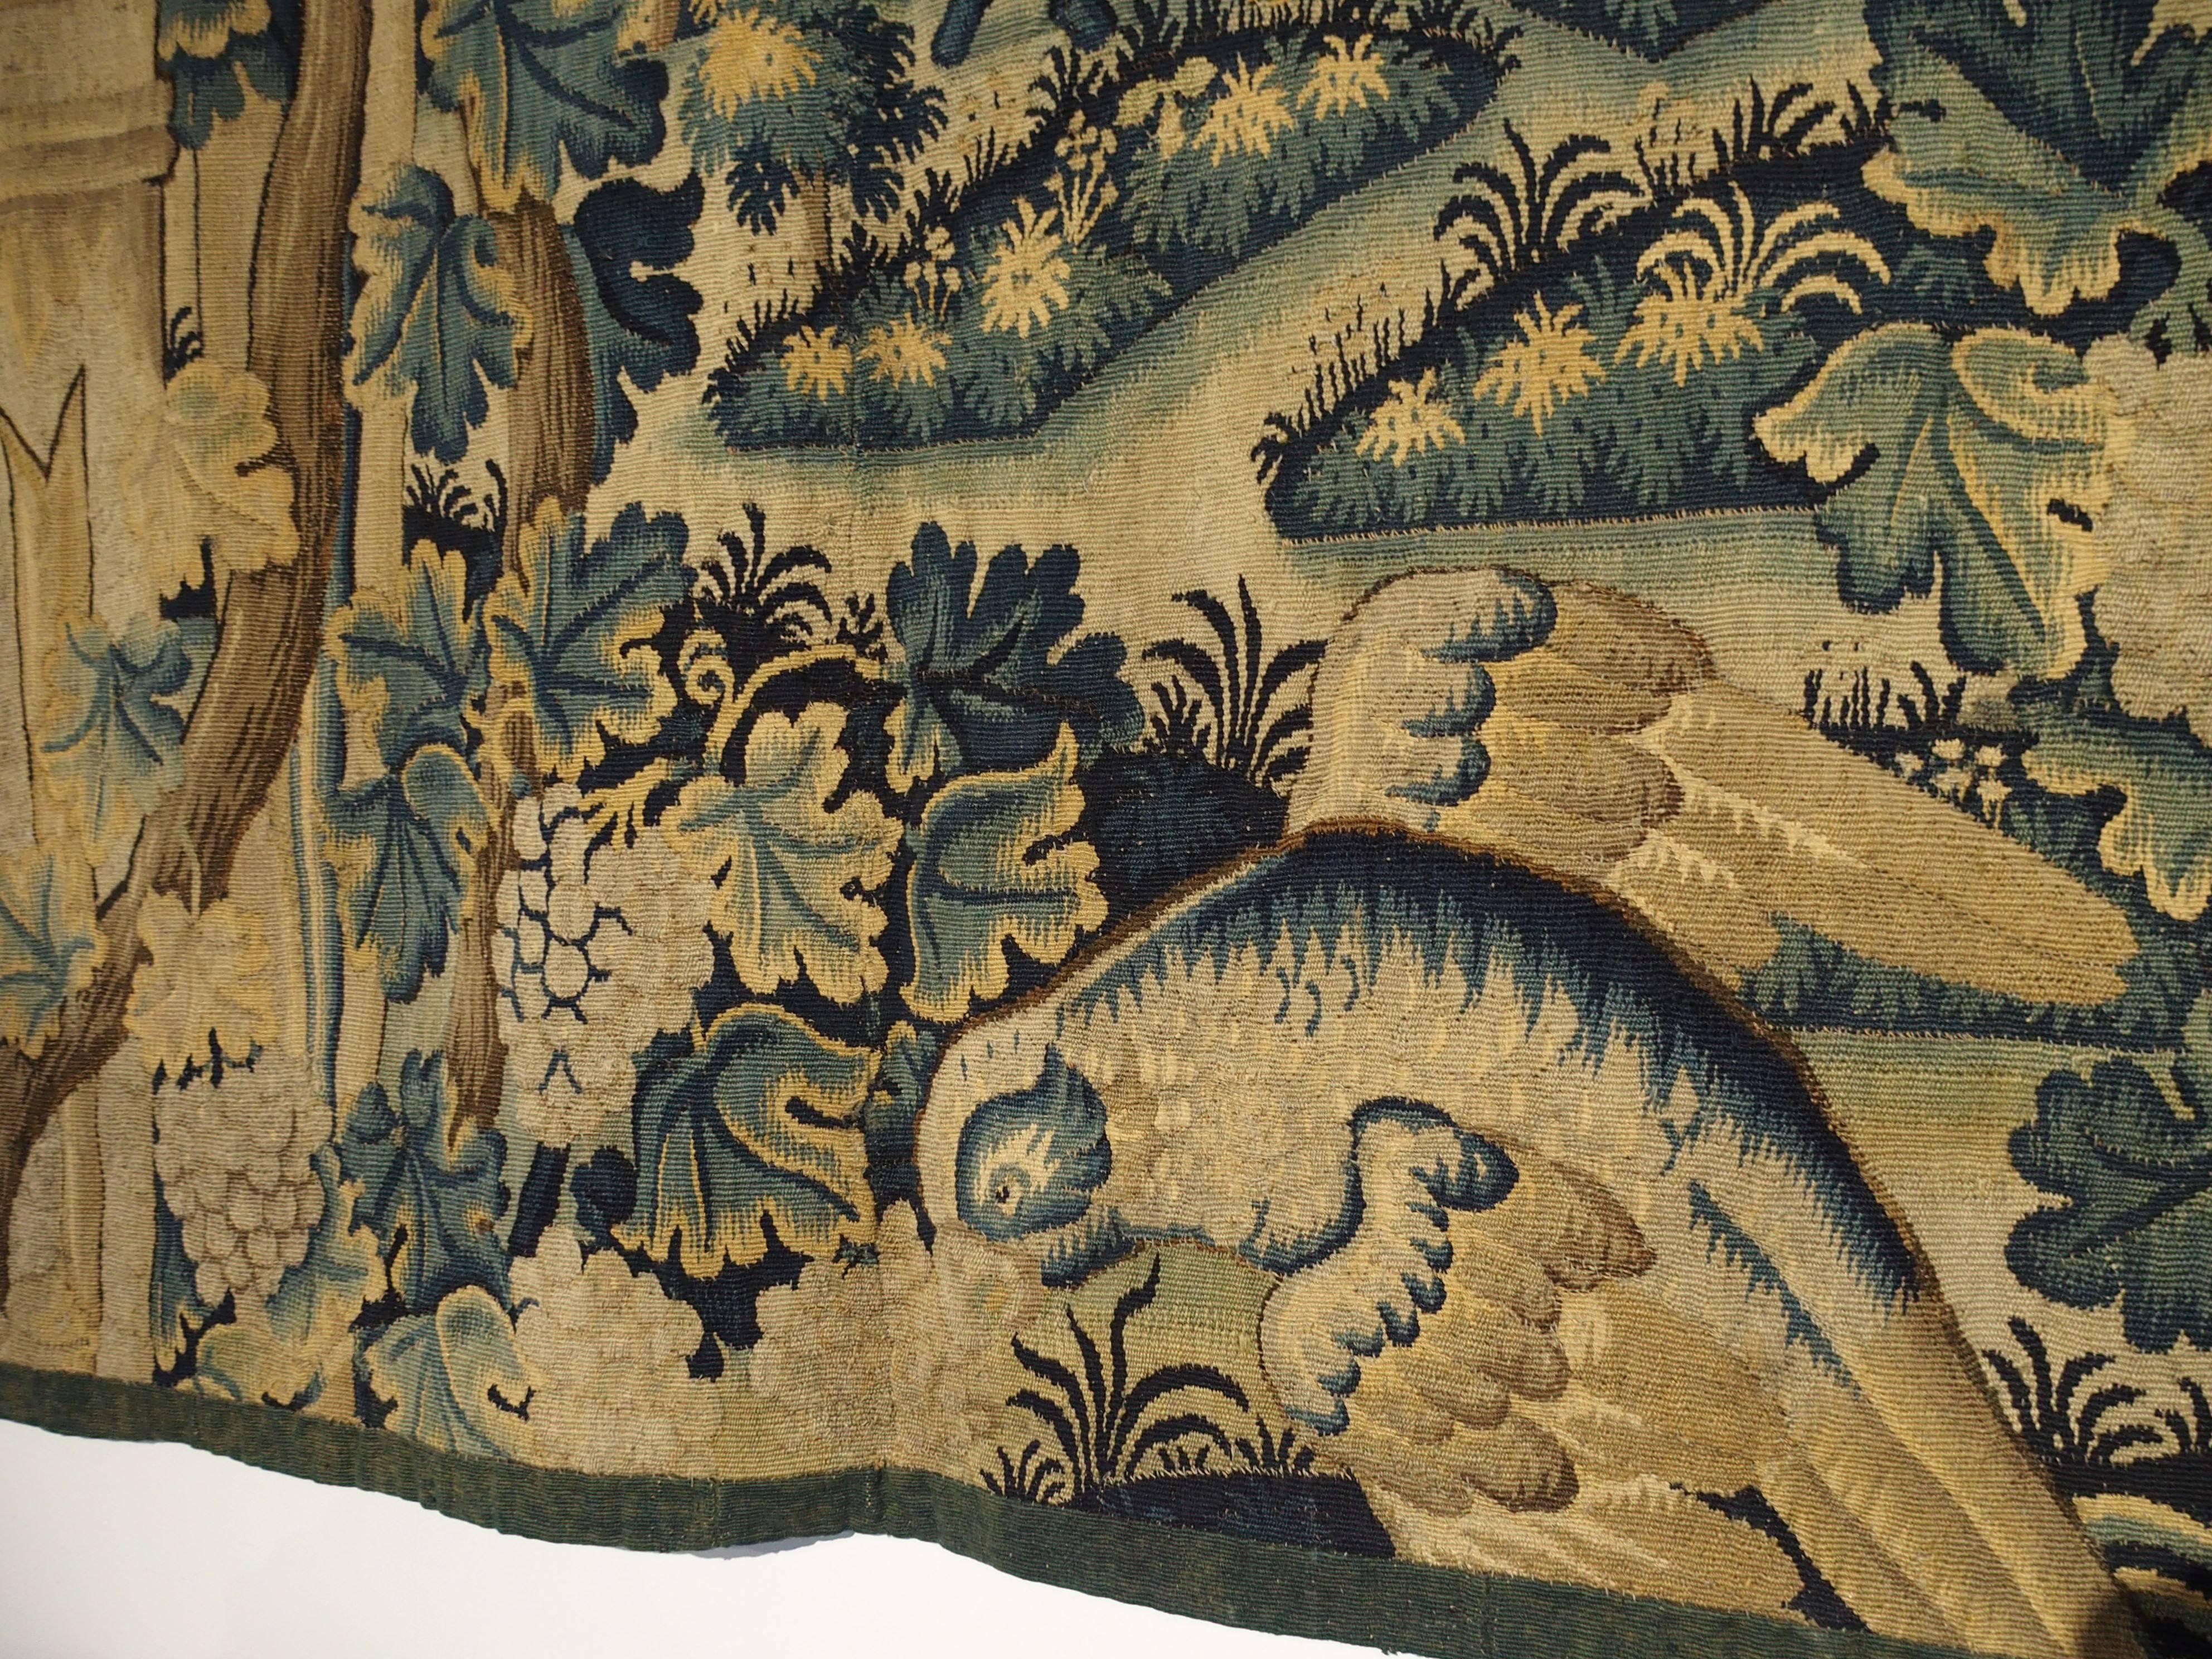 17th Century Tapestry Fragment from Flanders 4